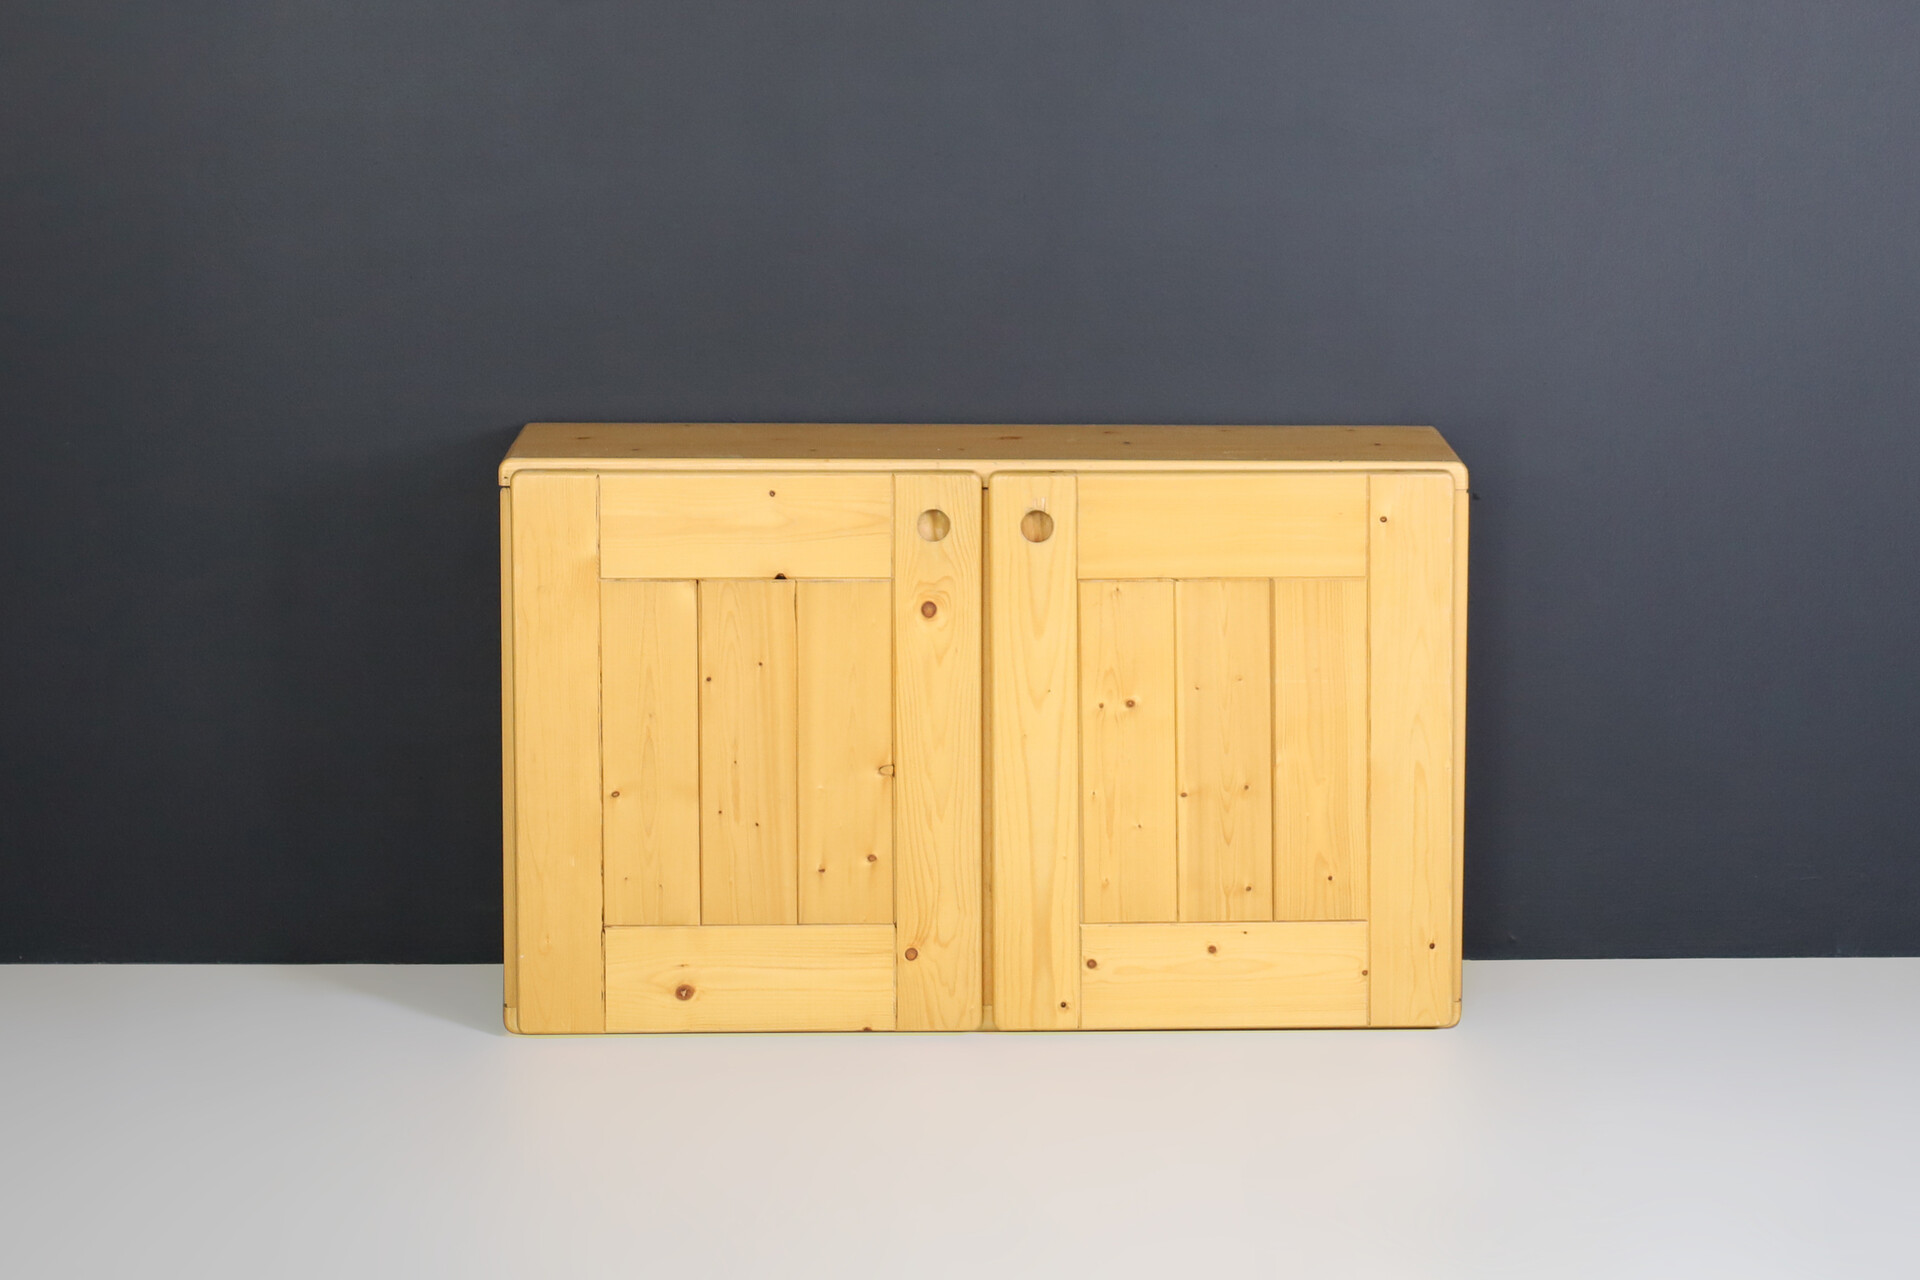 Mid century modern Charlotte Perriand Pine Hanging cupboard for Les Arcs, France 1960s Mid-20th century